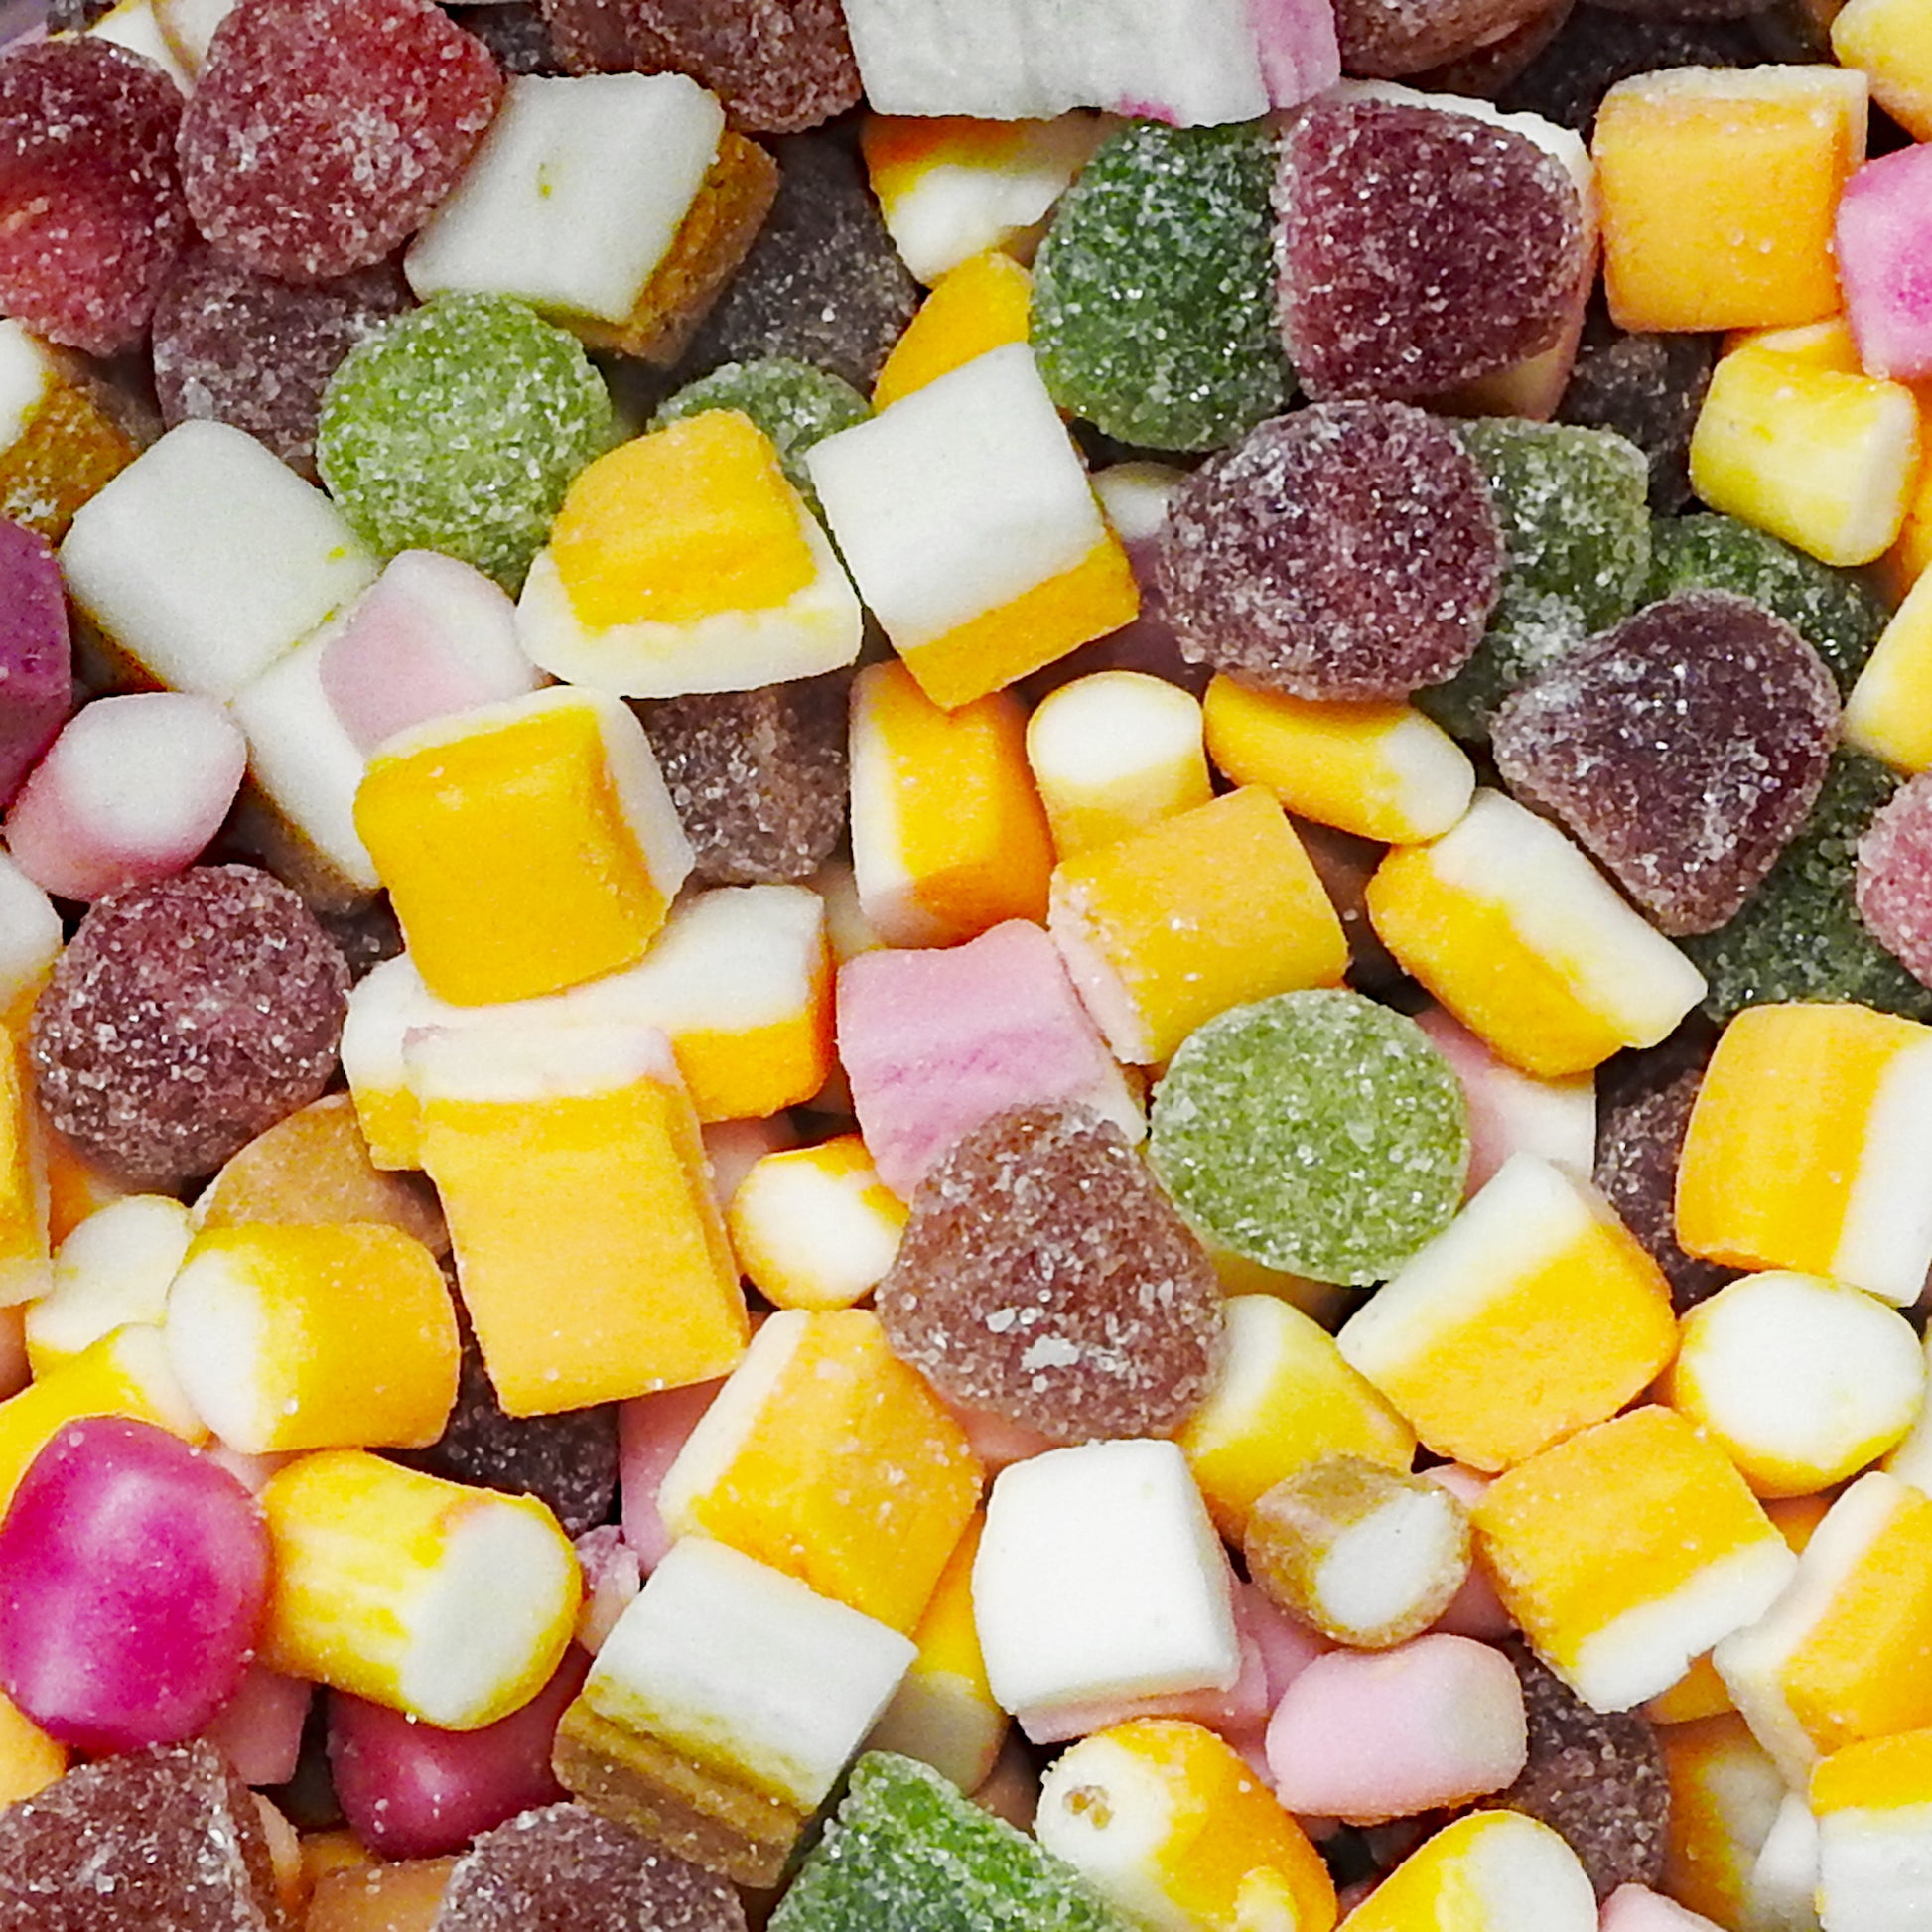 Dolly Mixtures - Retro Sweets at The Sweetie Jar